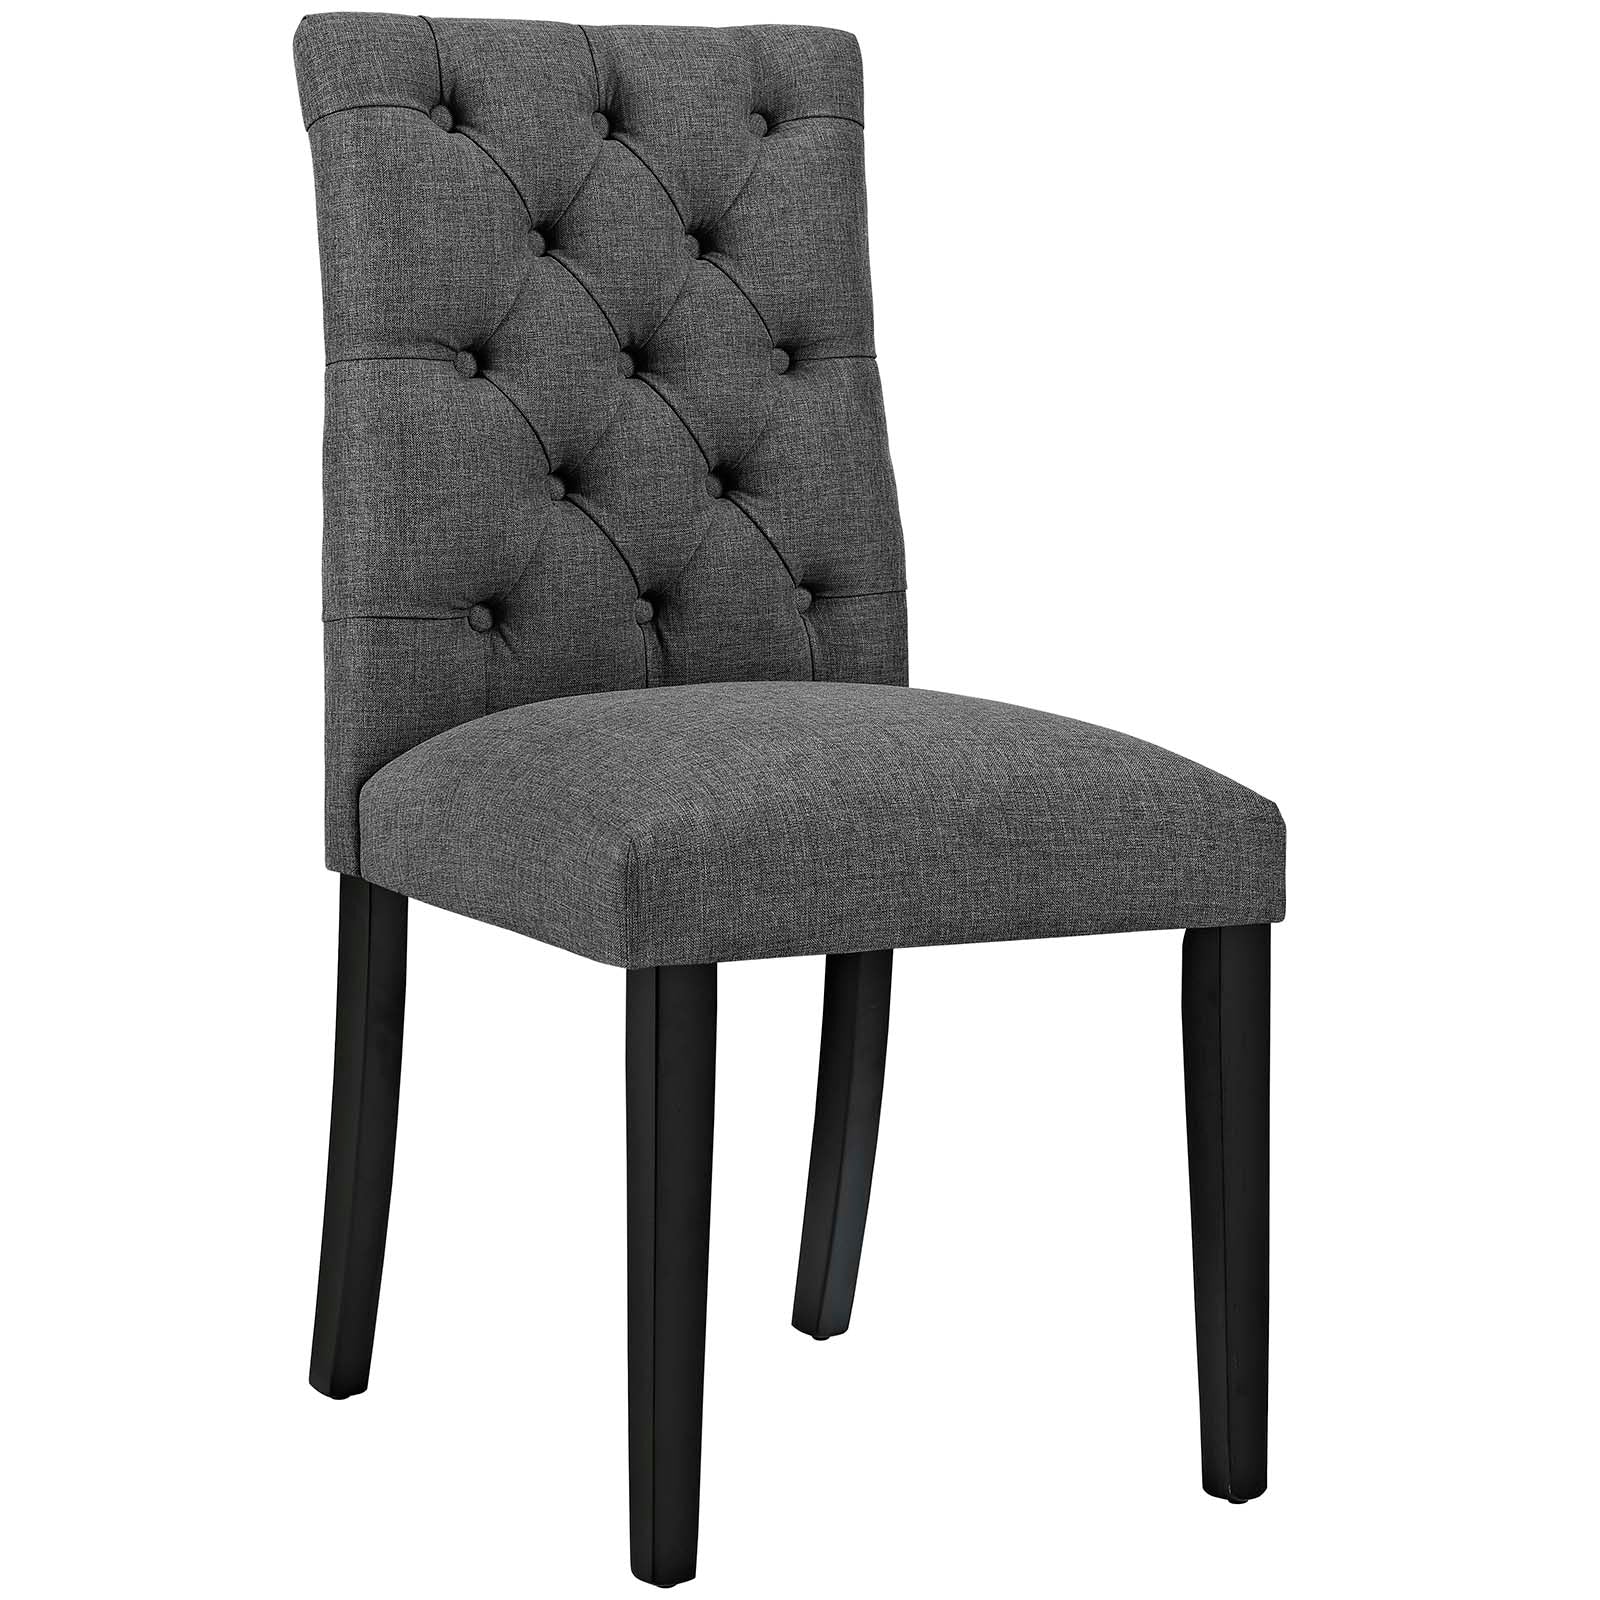 Duchess Dining Chair Fabric Set of 4-Dining Chair-Modway-Wall2Wall Furnishings